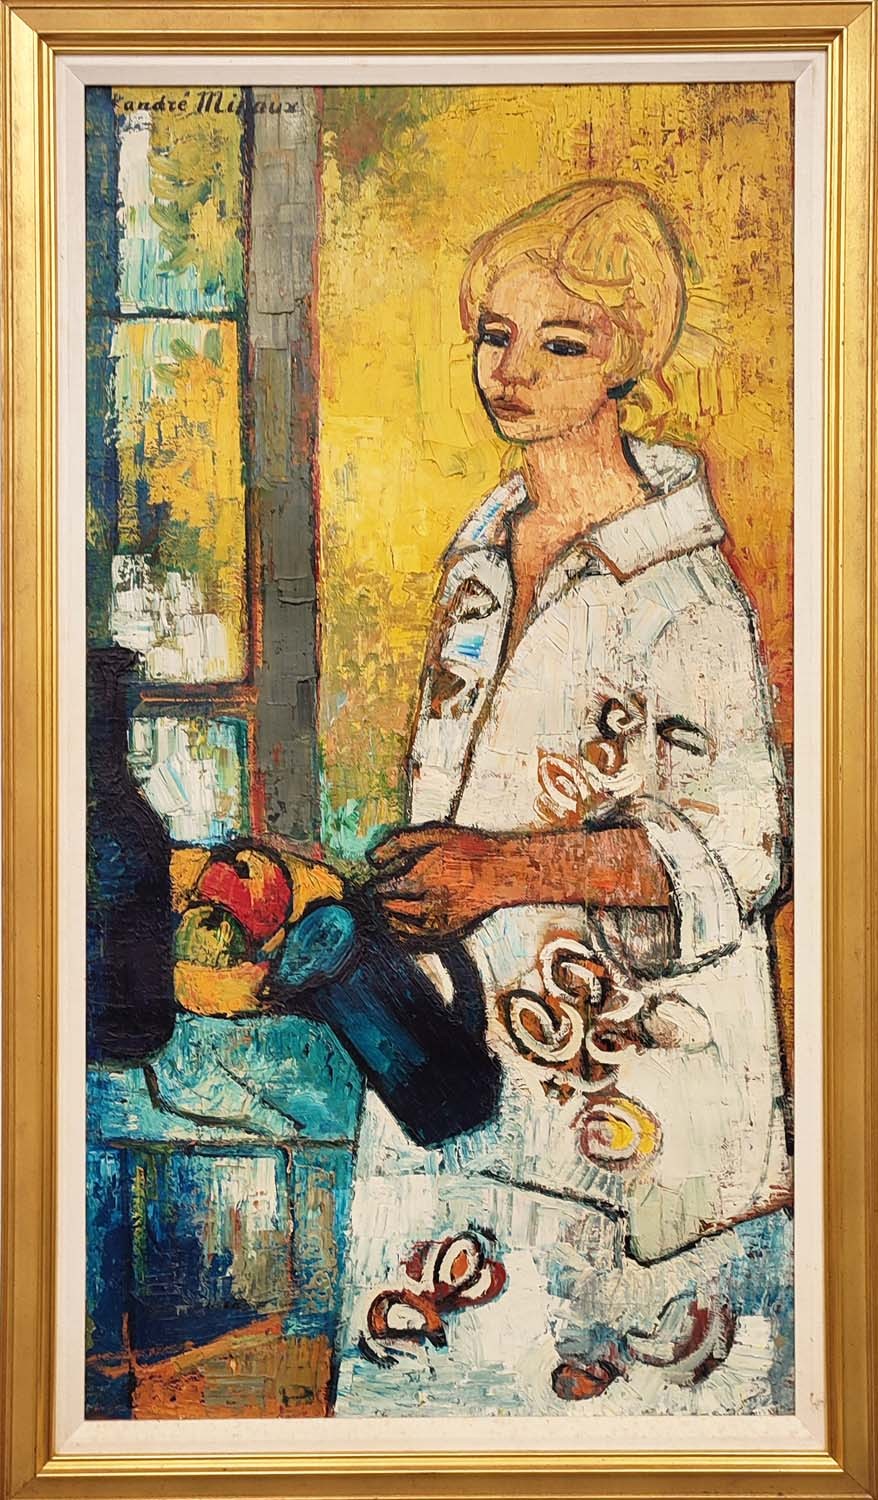 ANDRE MINAUX (French 1923-1986), 'Lady with Jug', oil on canvas, 130cm x 69cm, framed. (Subject to